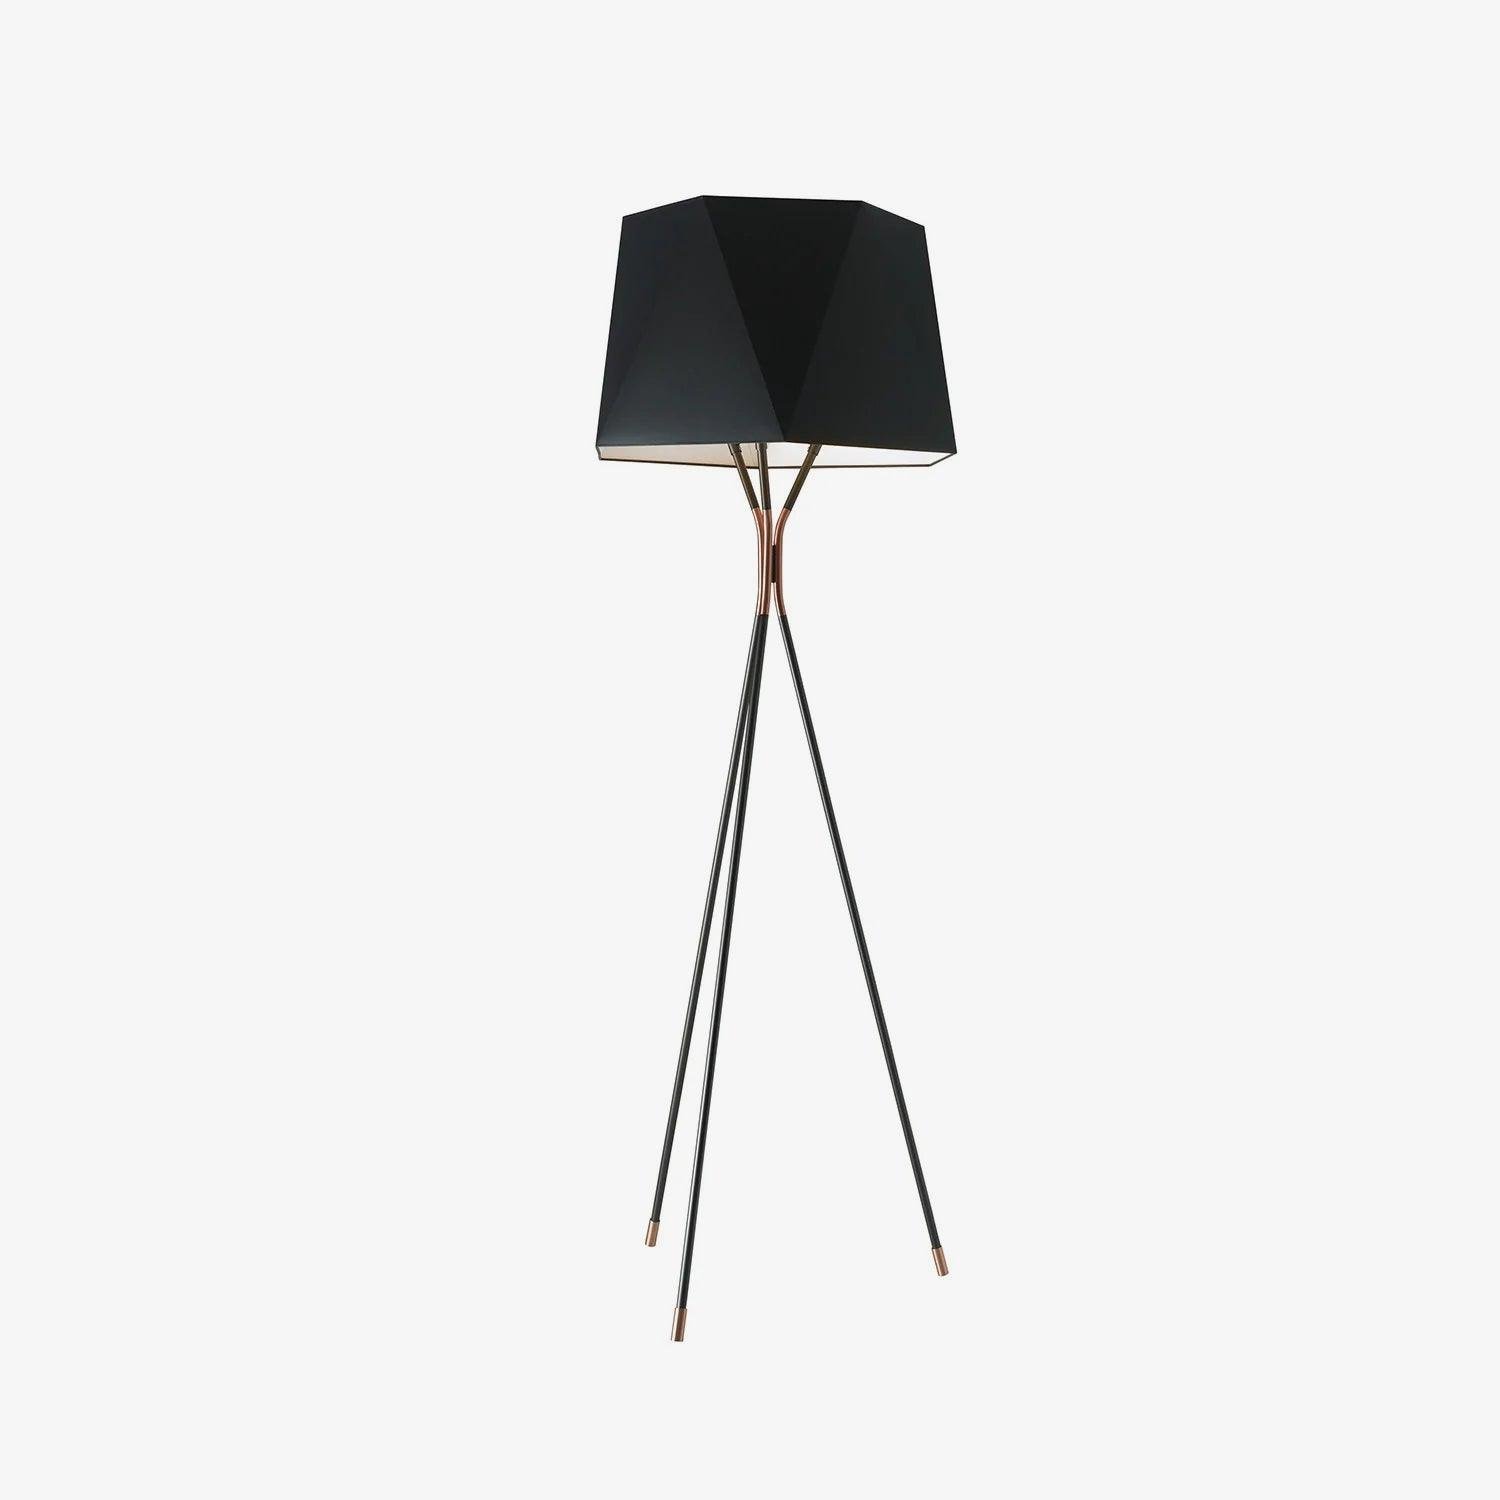 Solitaire Floor Lamp with a diameter of 21.7 inches and a height of 65 inches, or 55cm in diameter and 165cm in height, with a UK plug.